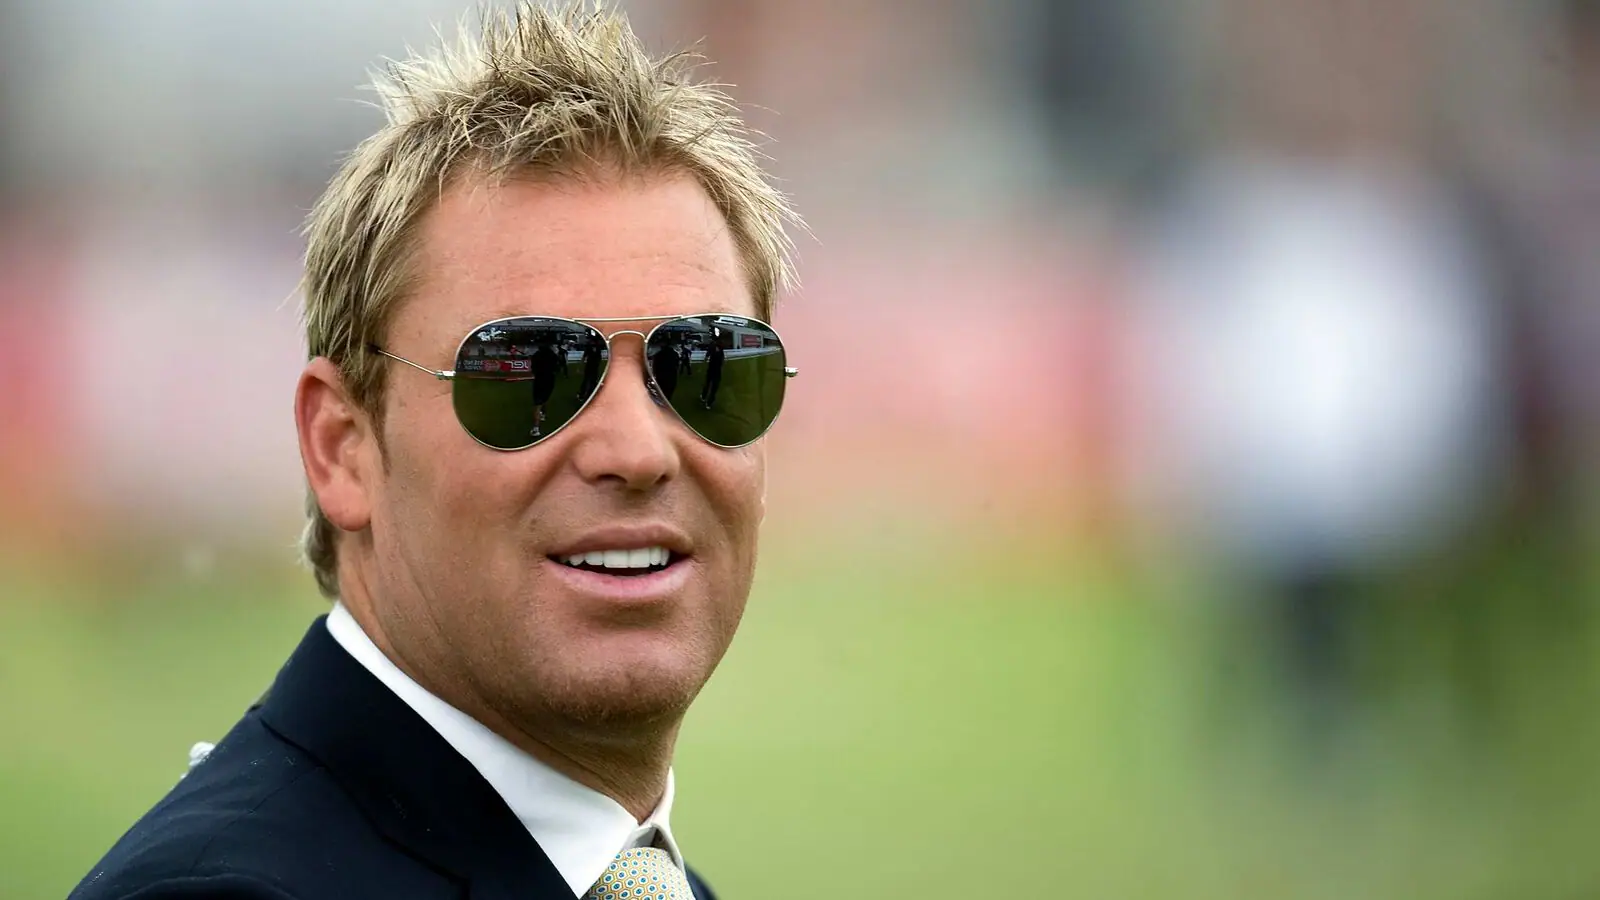 Shane Warne and fixing allegations